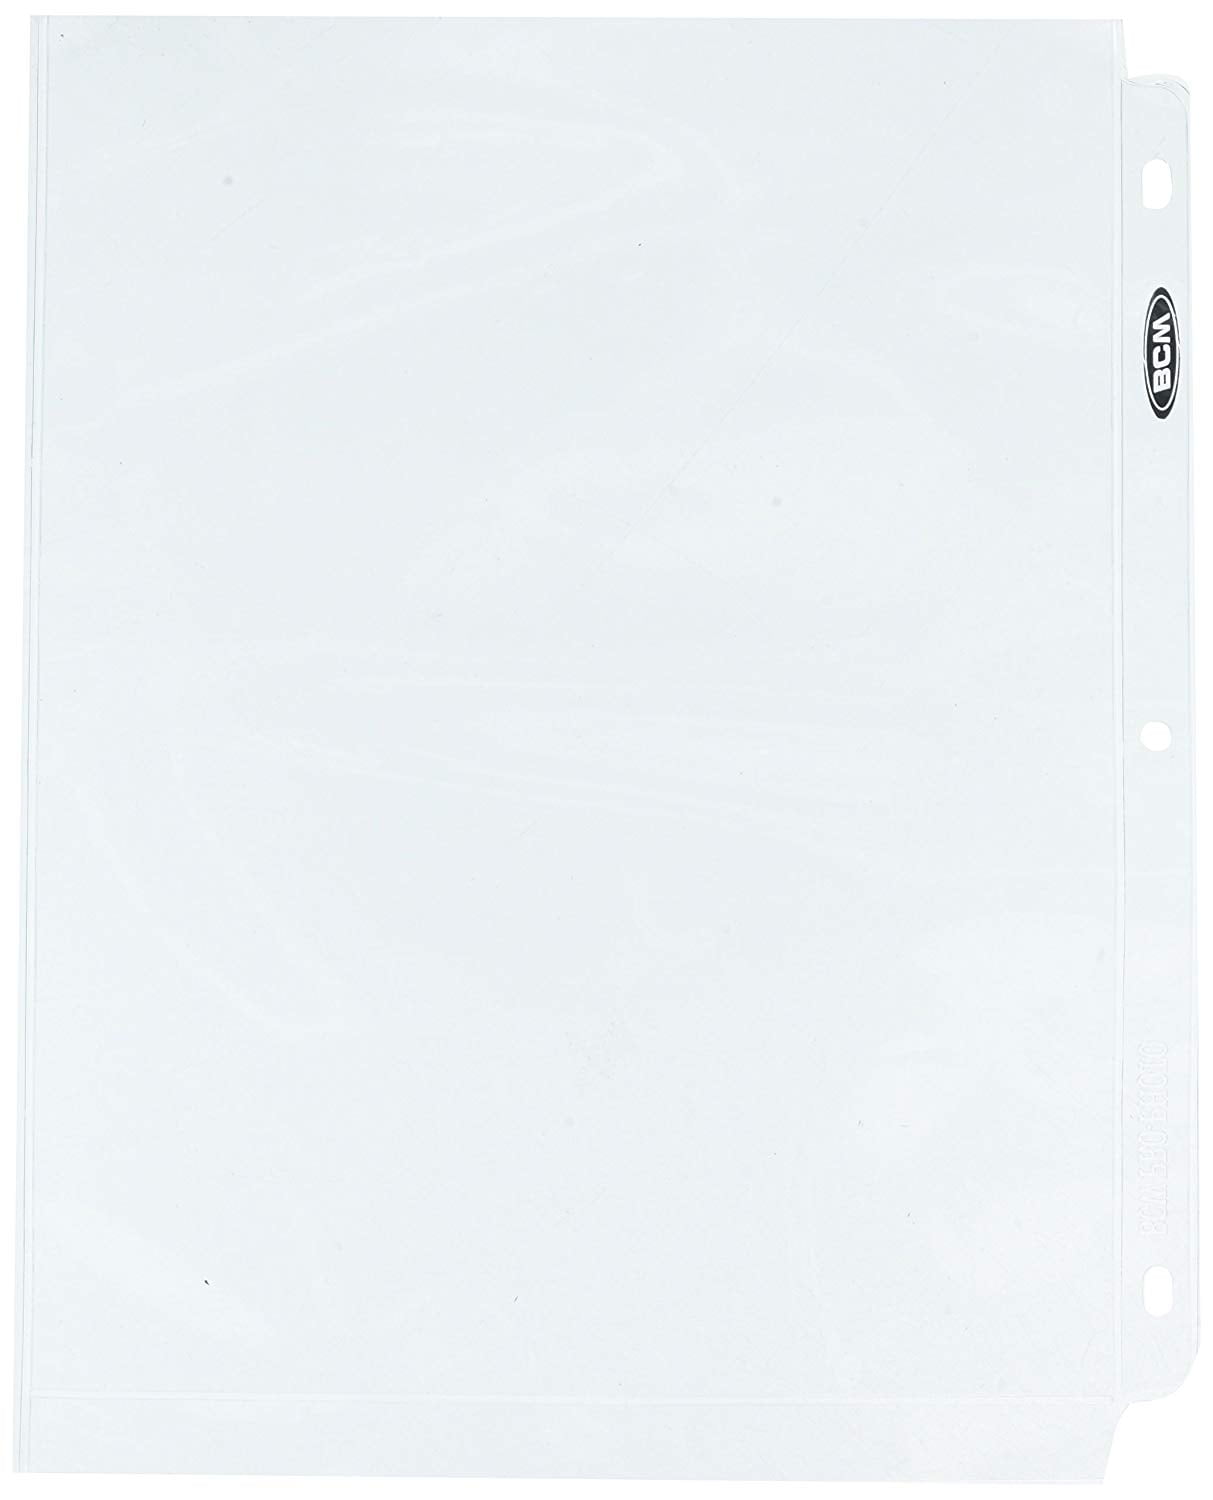 BCW PRO 1-POCKET DOCUMENT PAGES 8.5 X 11 40 